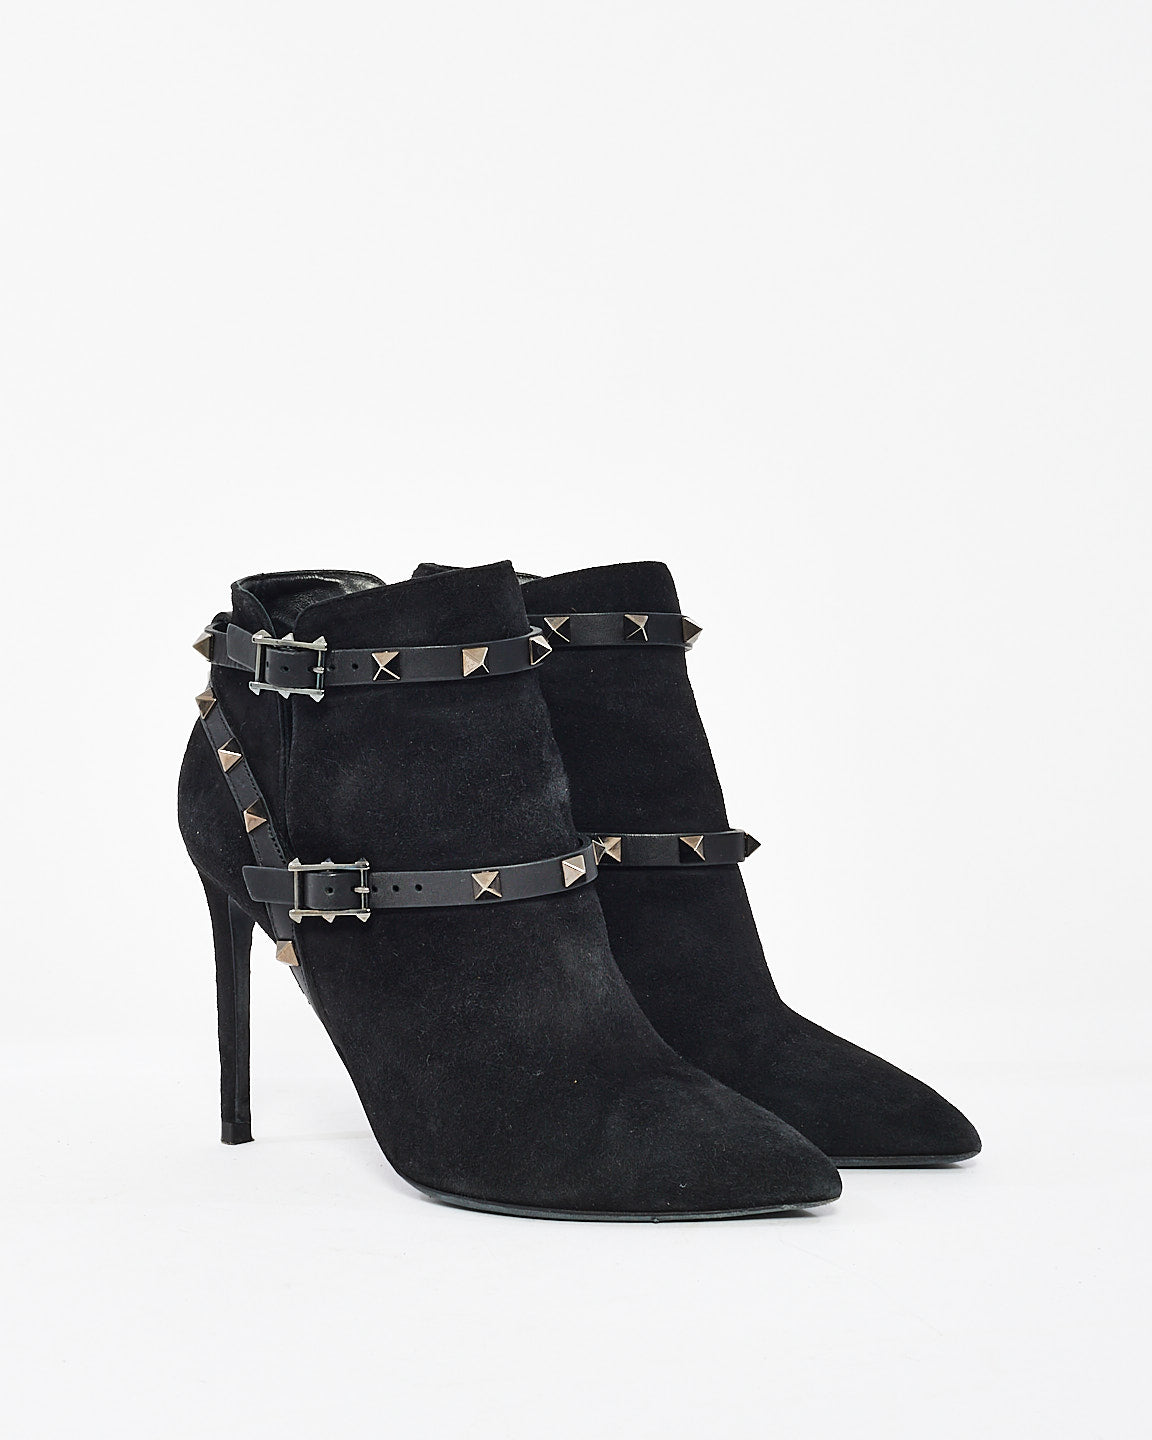 Valentino Black Suede Pointed Toe Rockstud Ankle Booties - 37